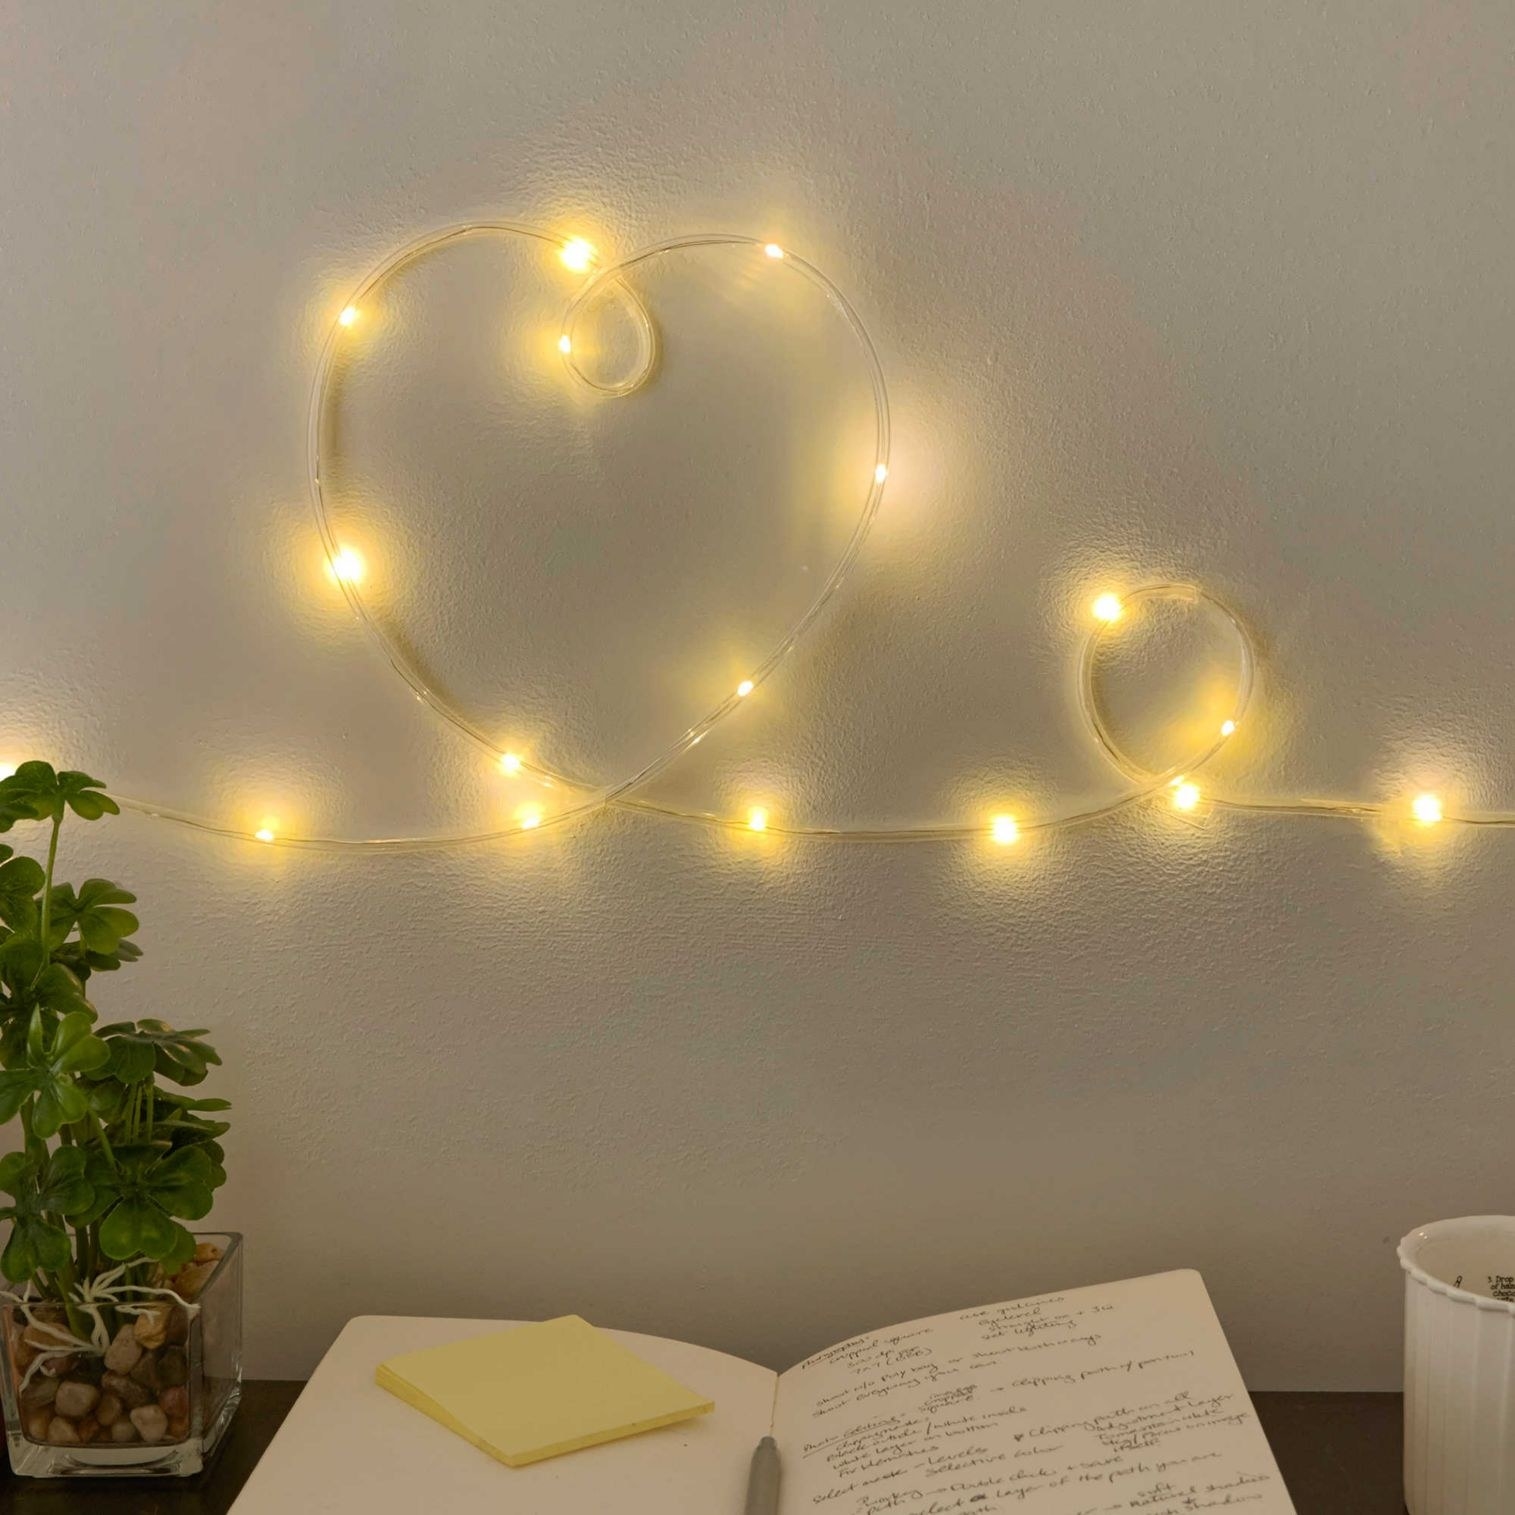 String lights on a wall above a desk